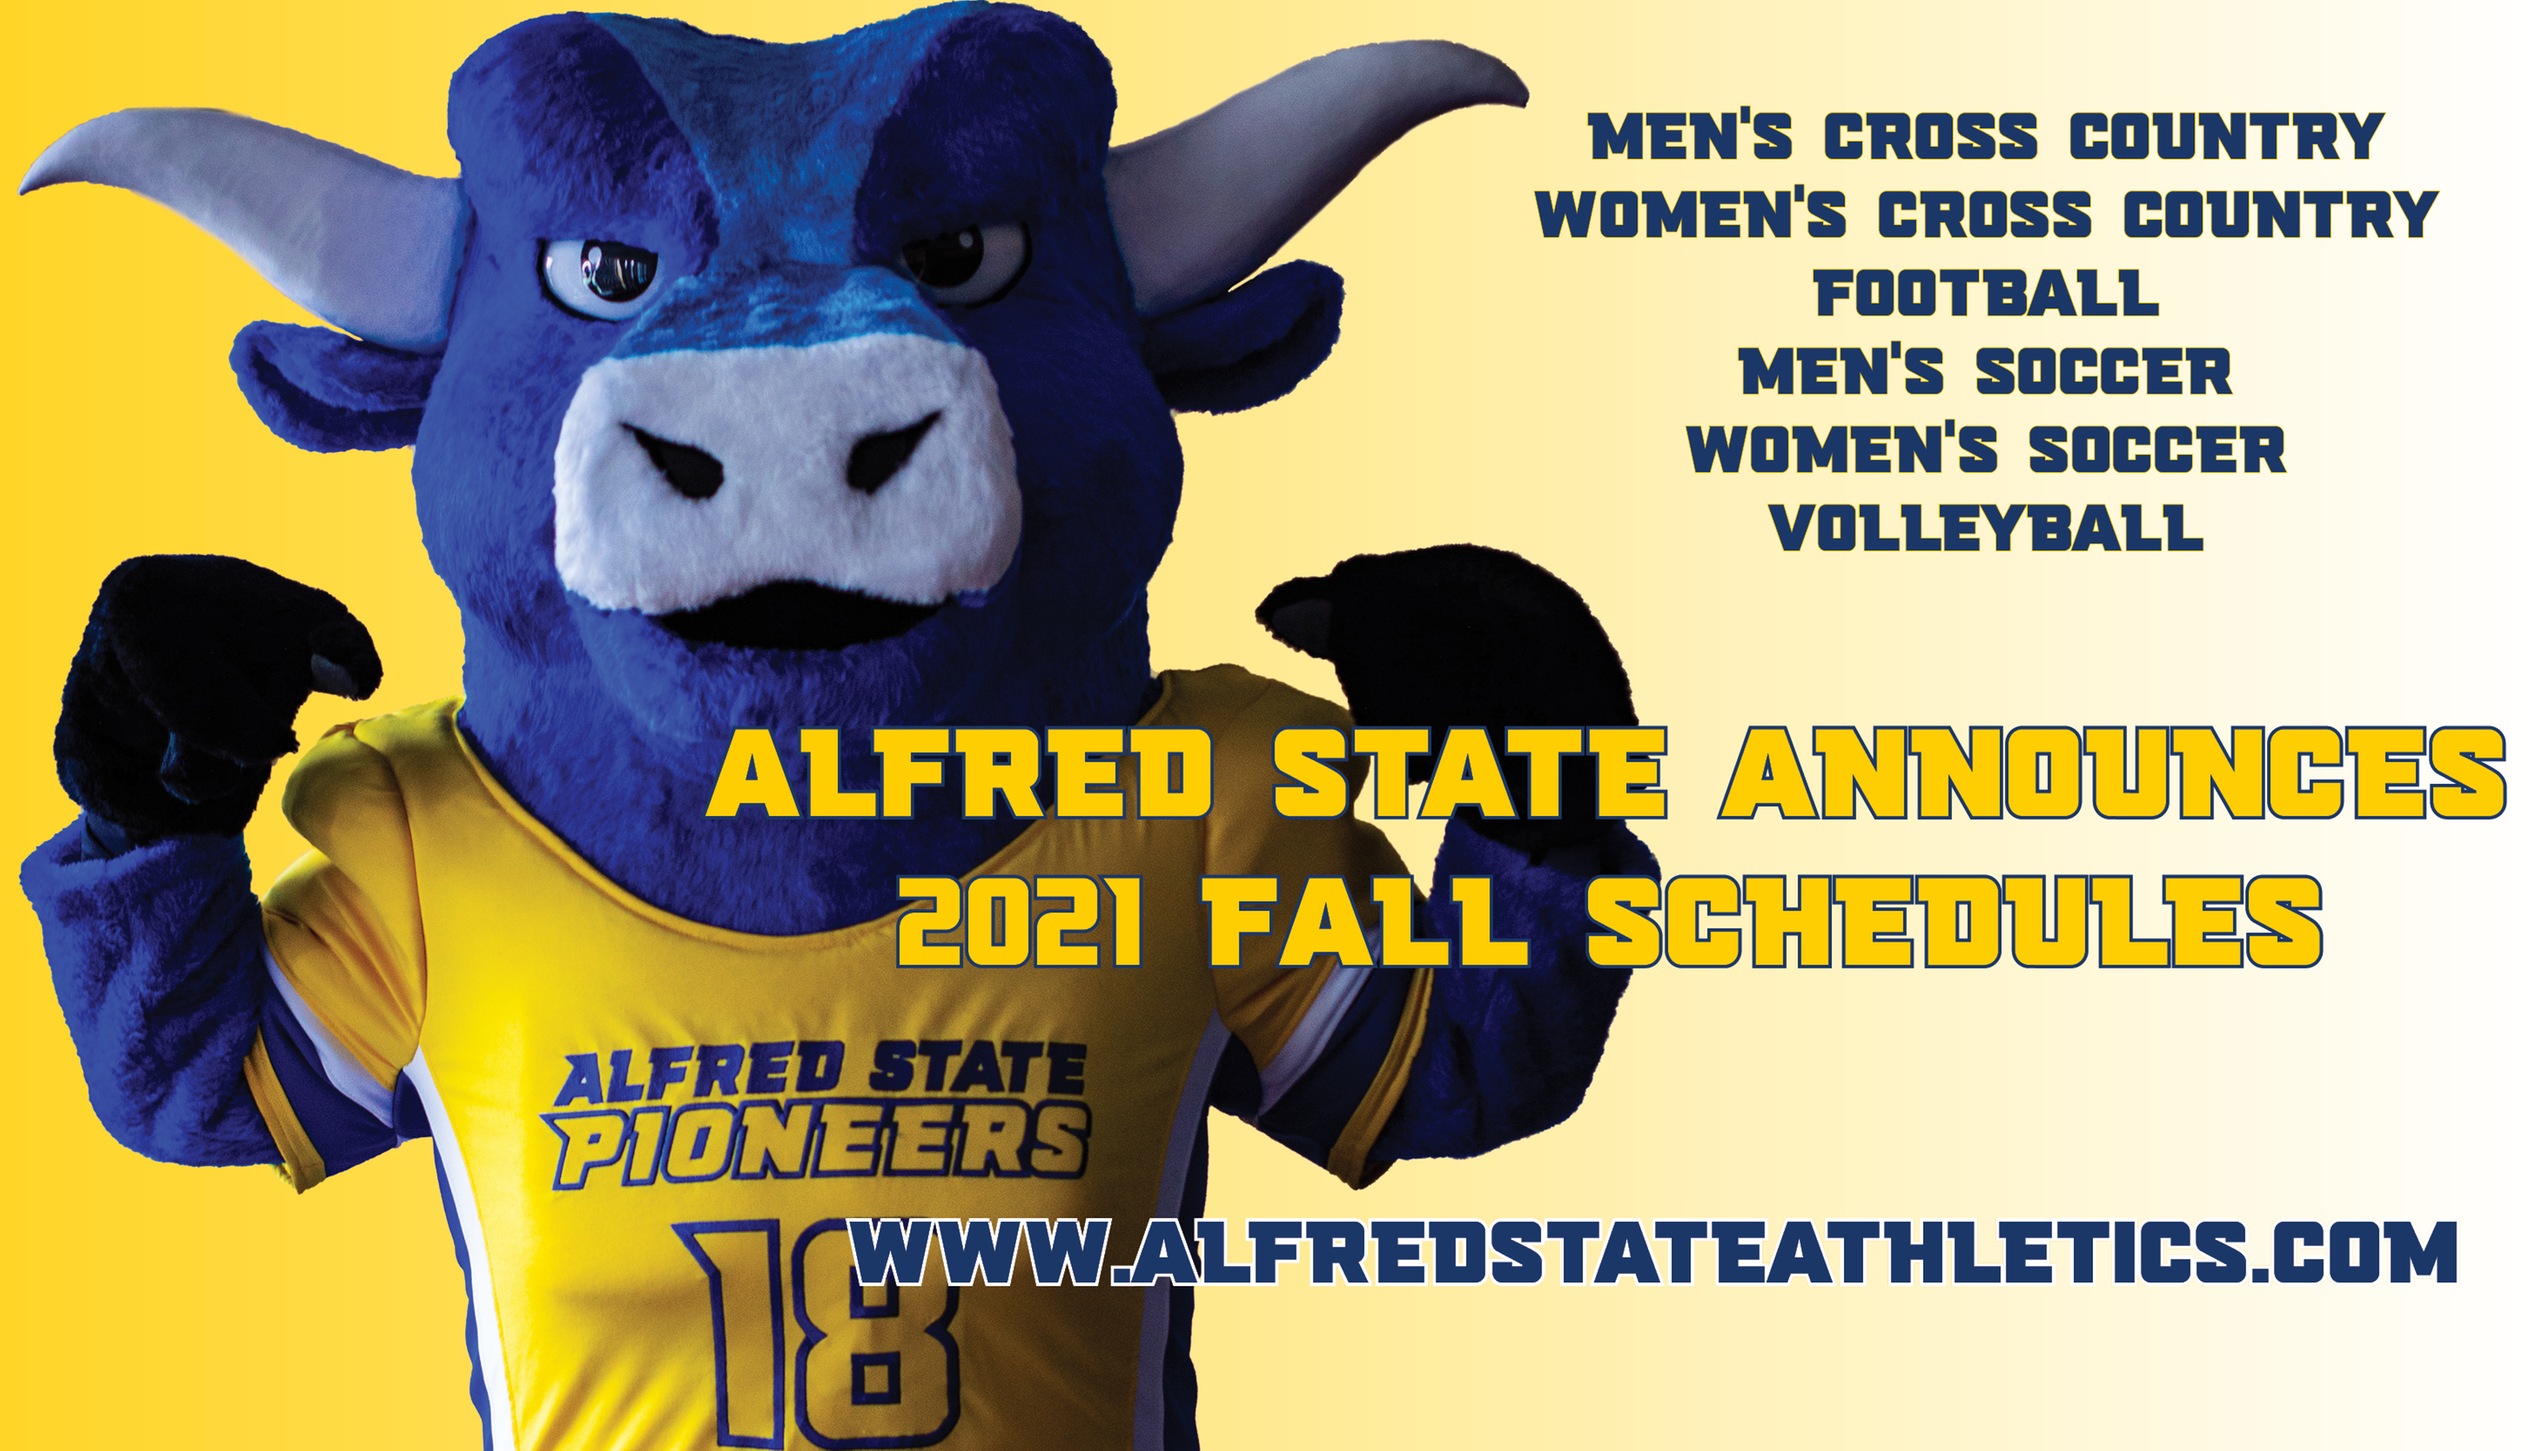 Alfred State Announces 2021 Fall Schedules